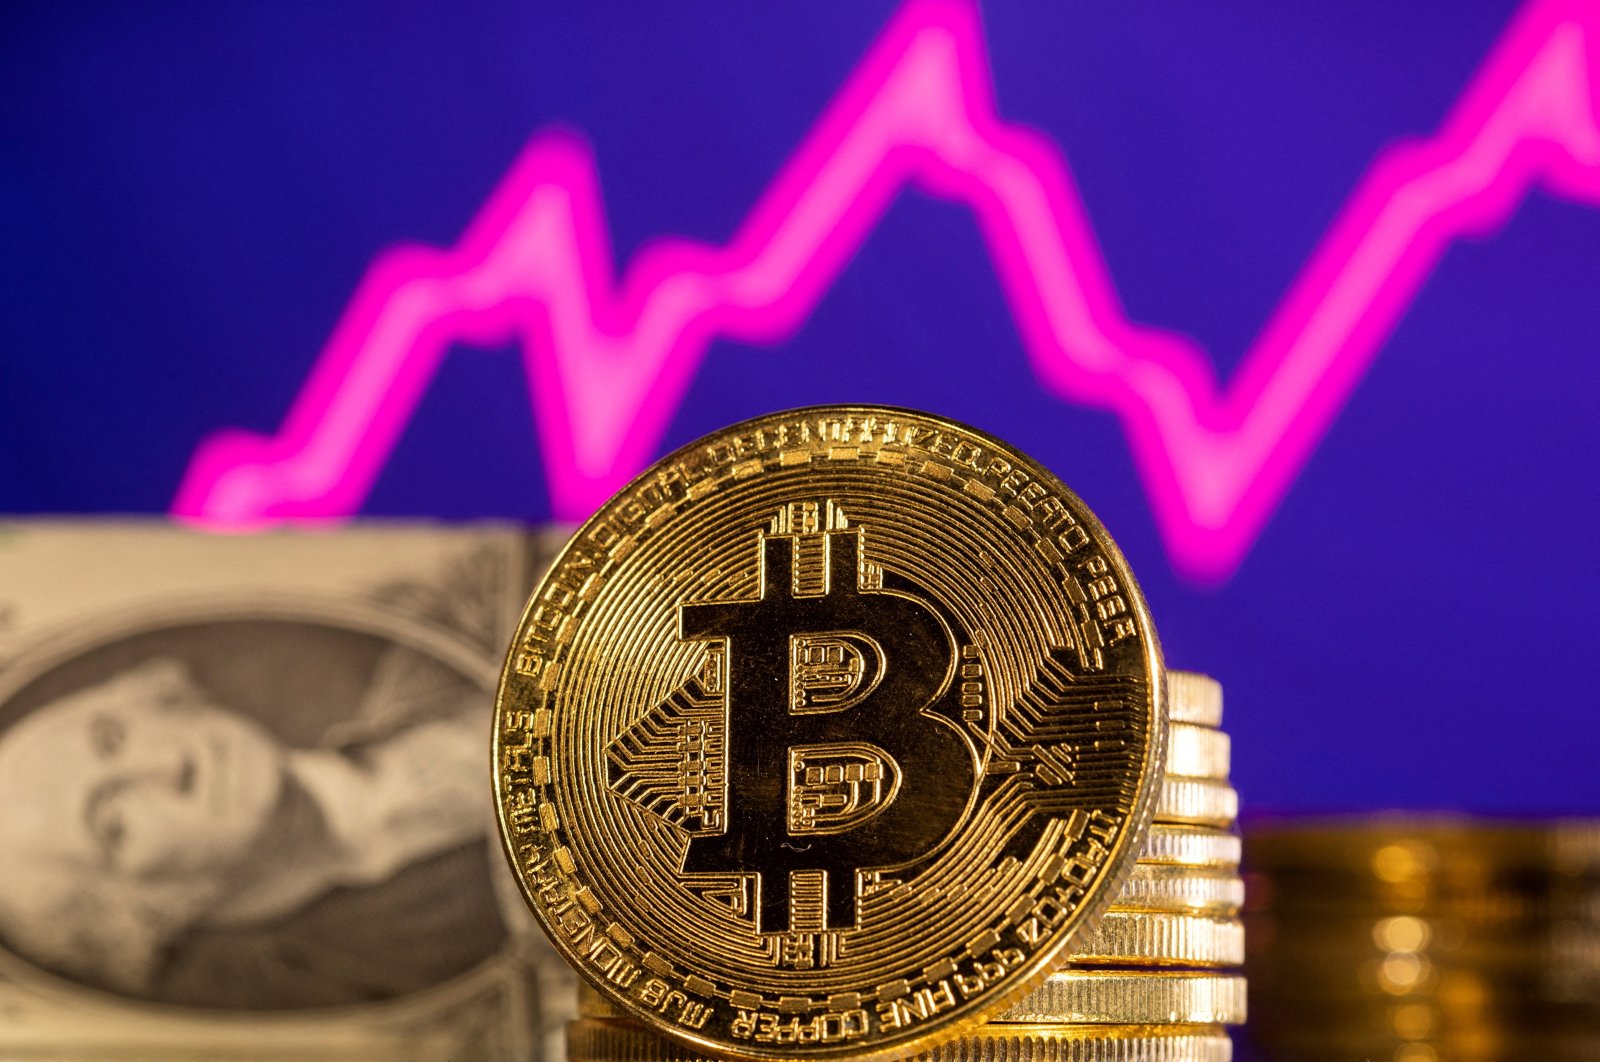 Bitcoin breaks $40,000 for 1st time this year as momentum builds